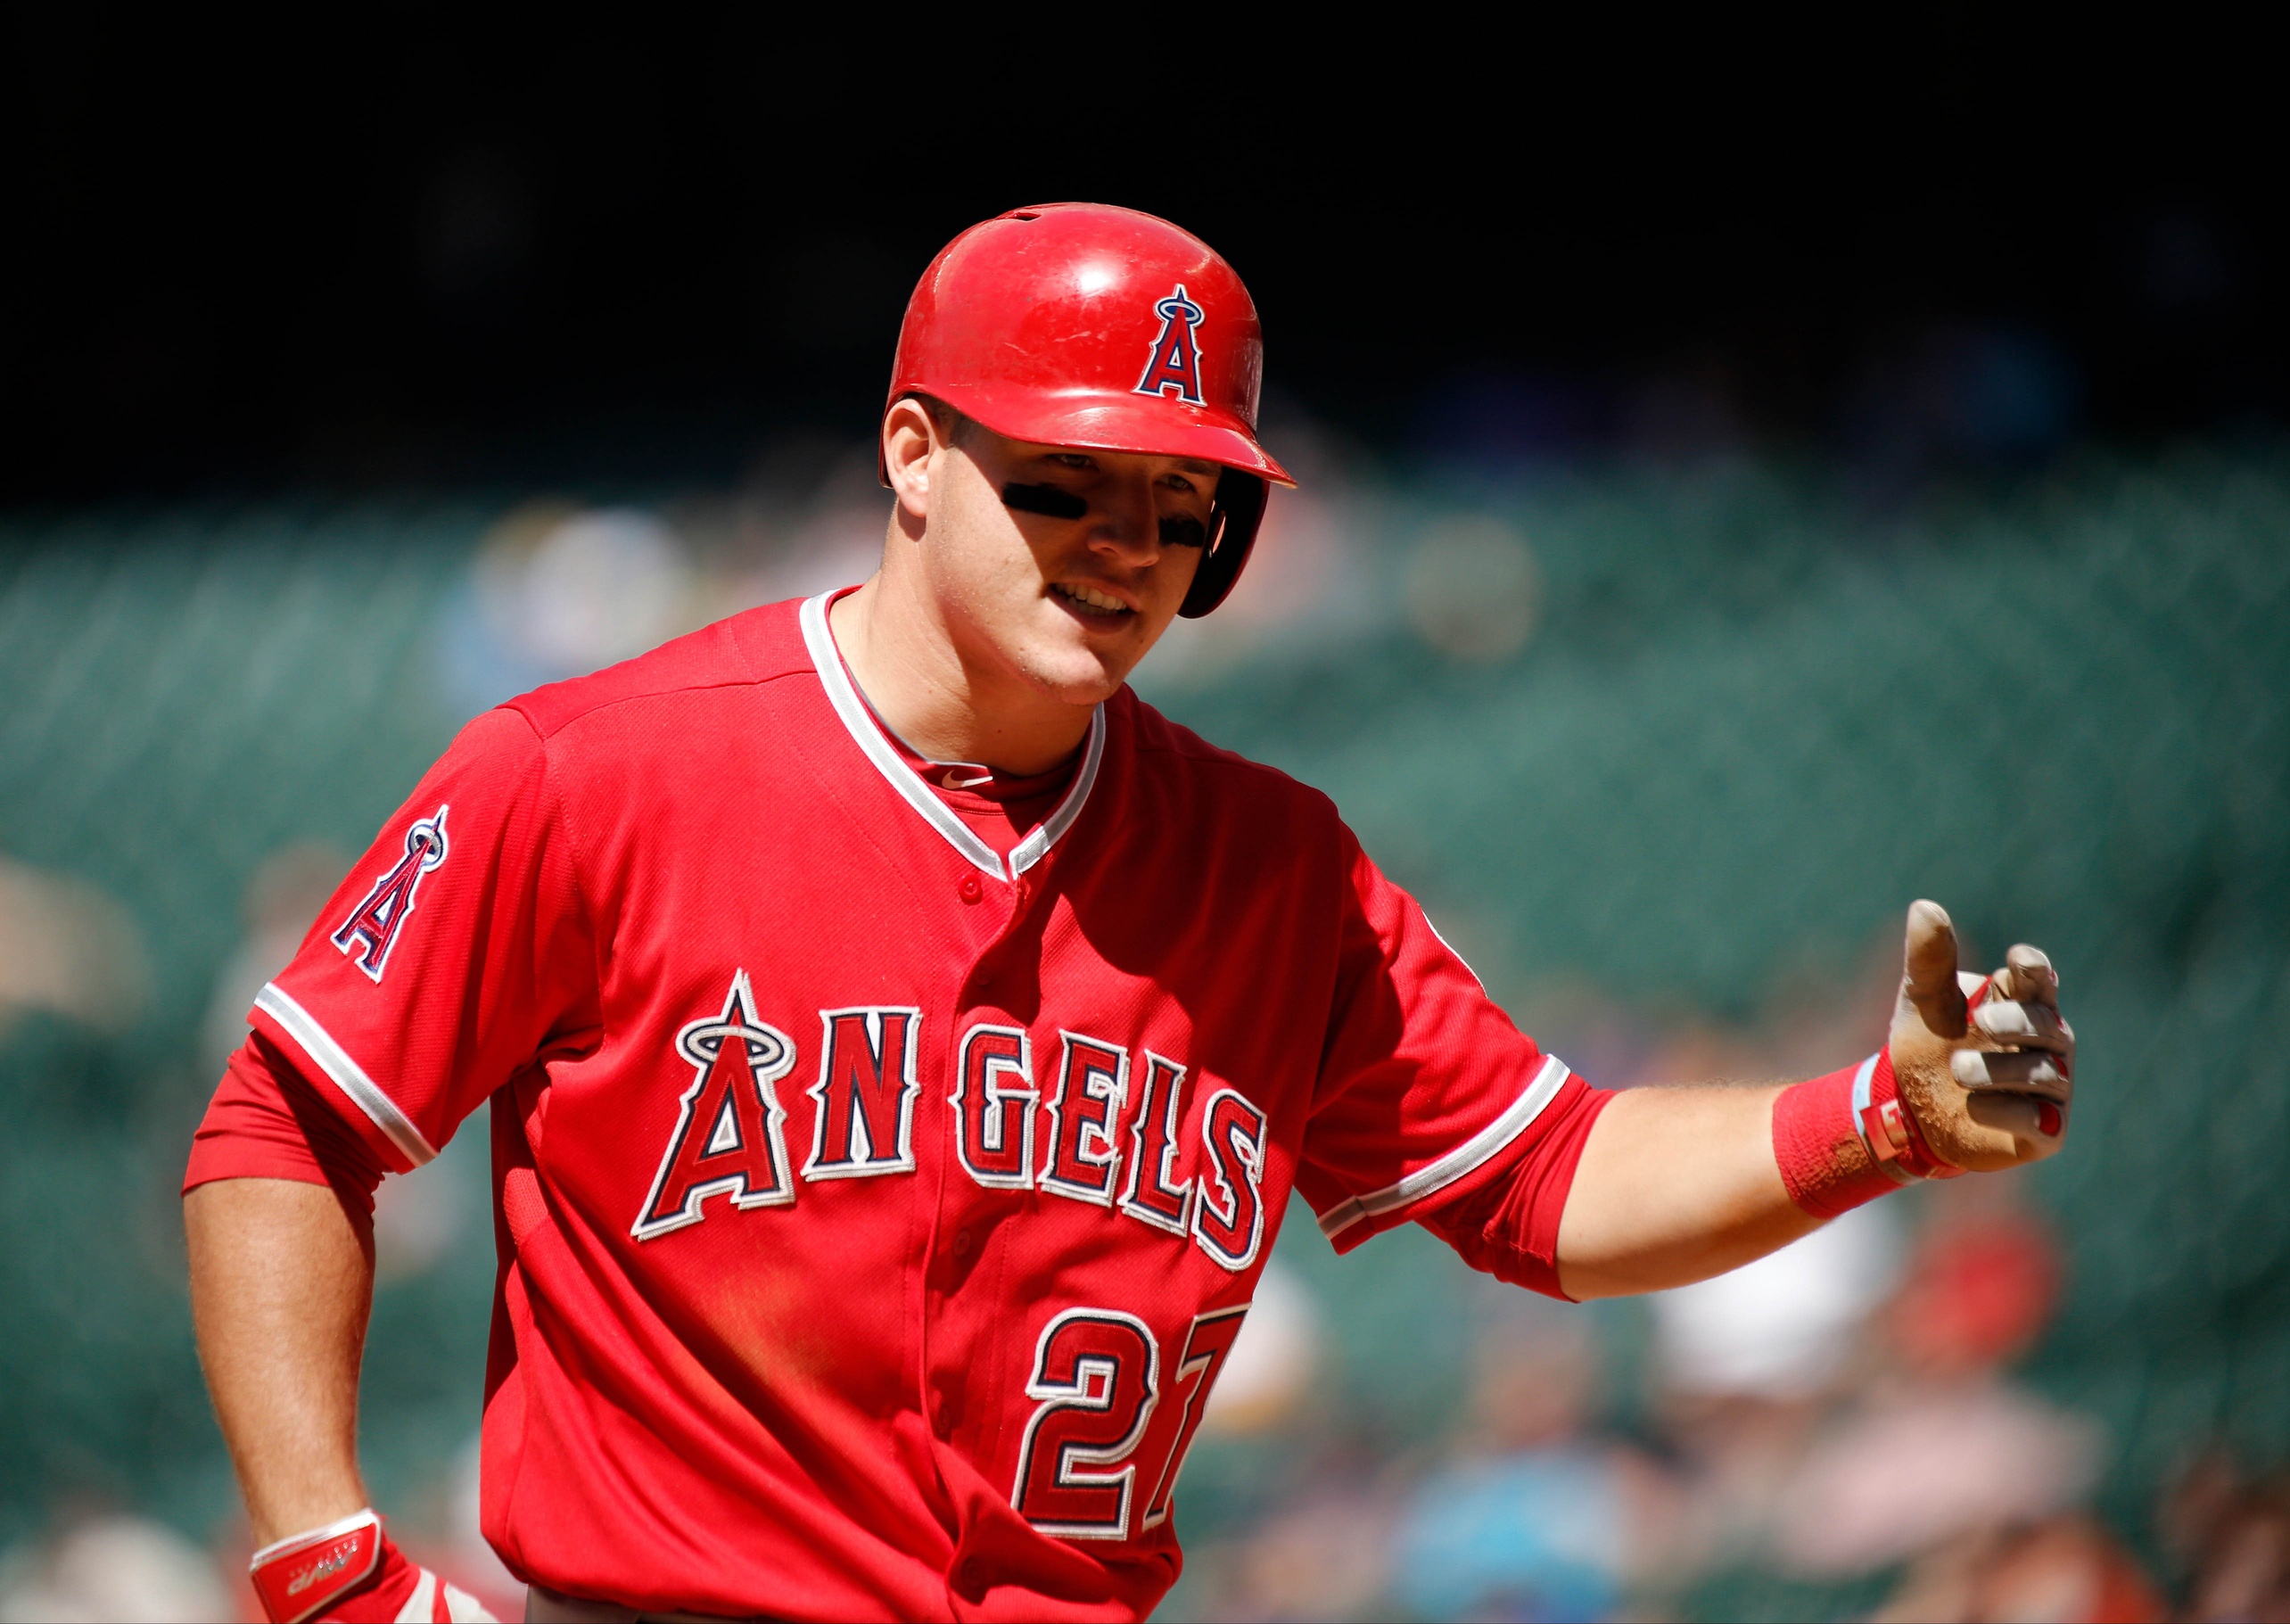 Can Mike Trout lead his team to the division crown? Photo by Andrew Richardson, USA Today Sports Images